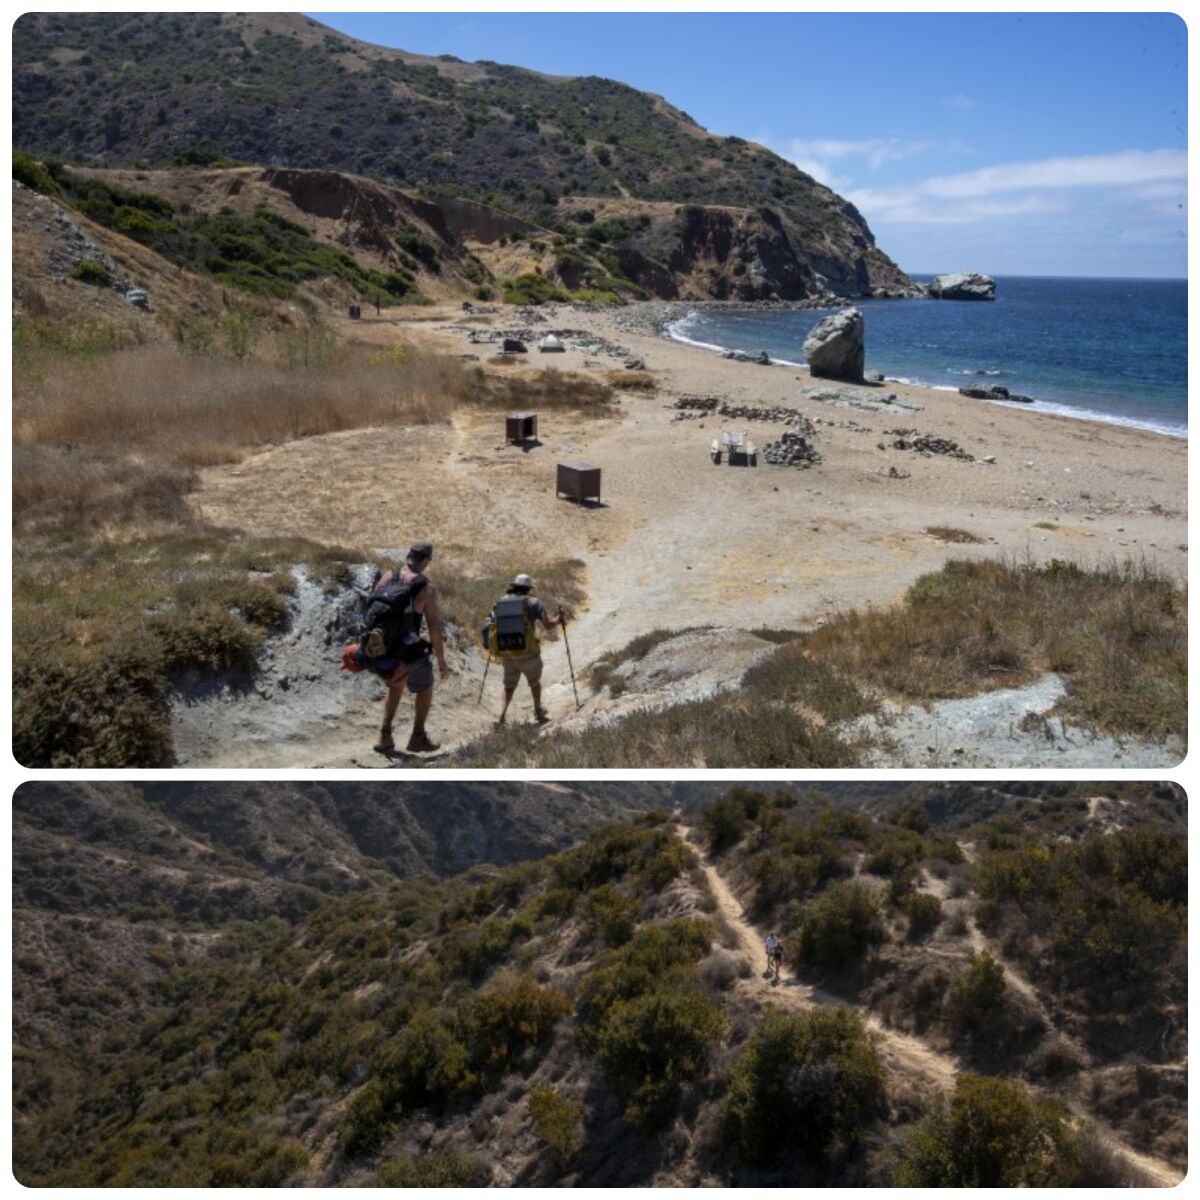 Hikers approach a small, sandy beach and a inland hiking trail.